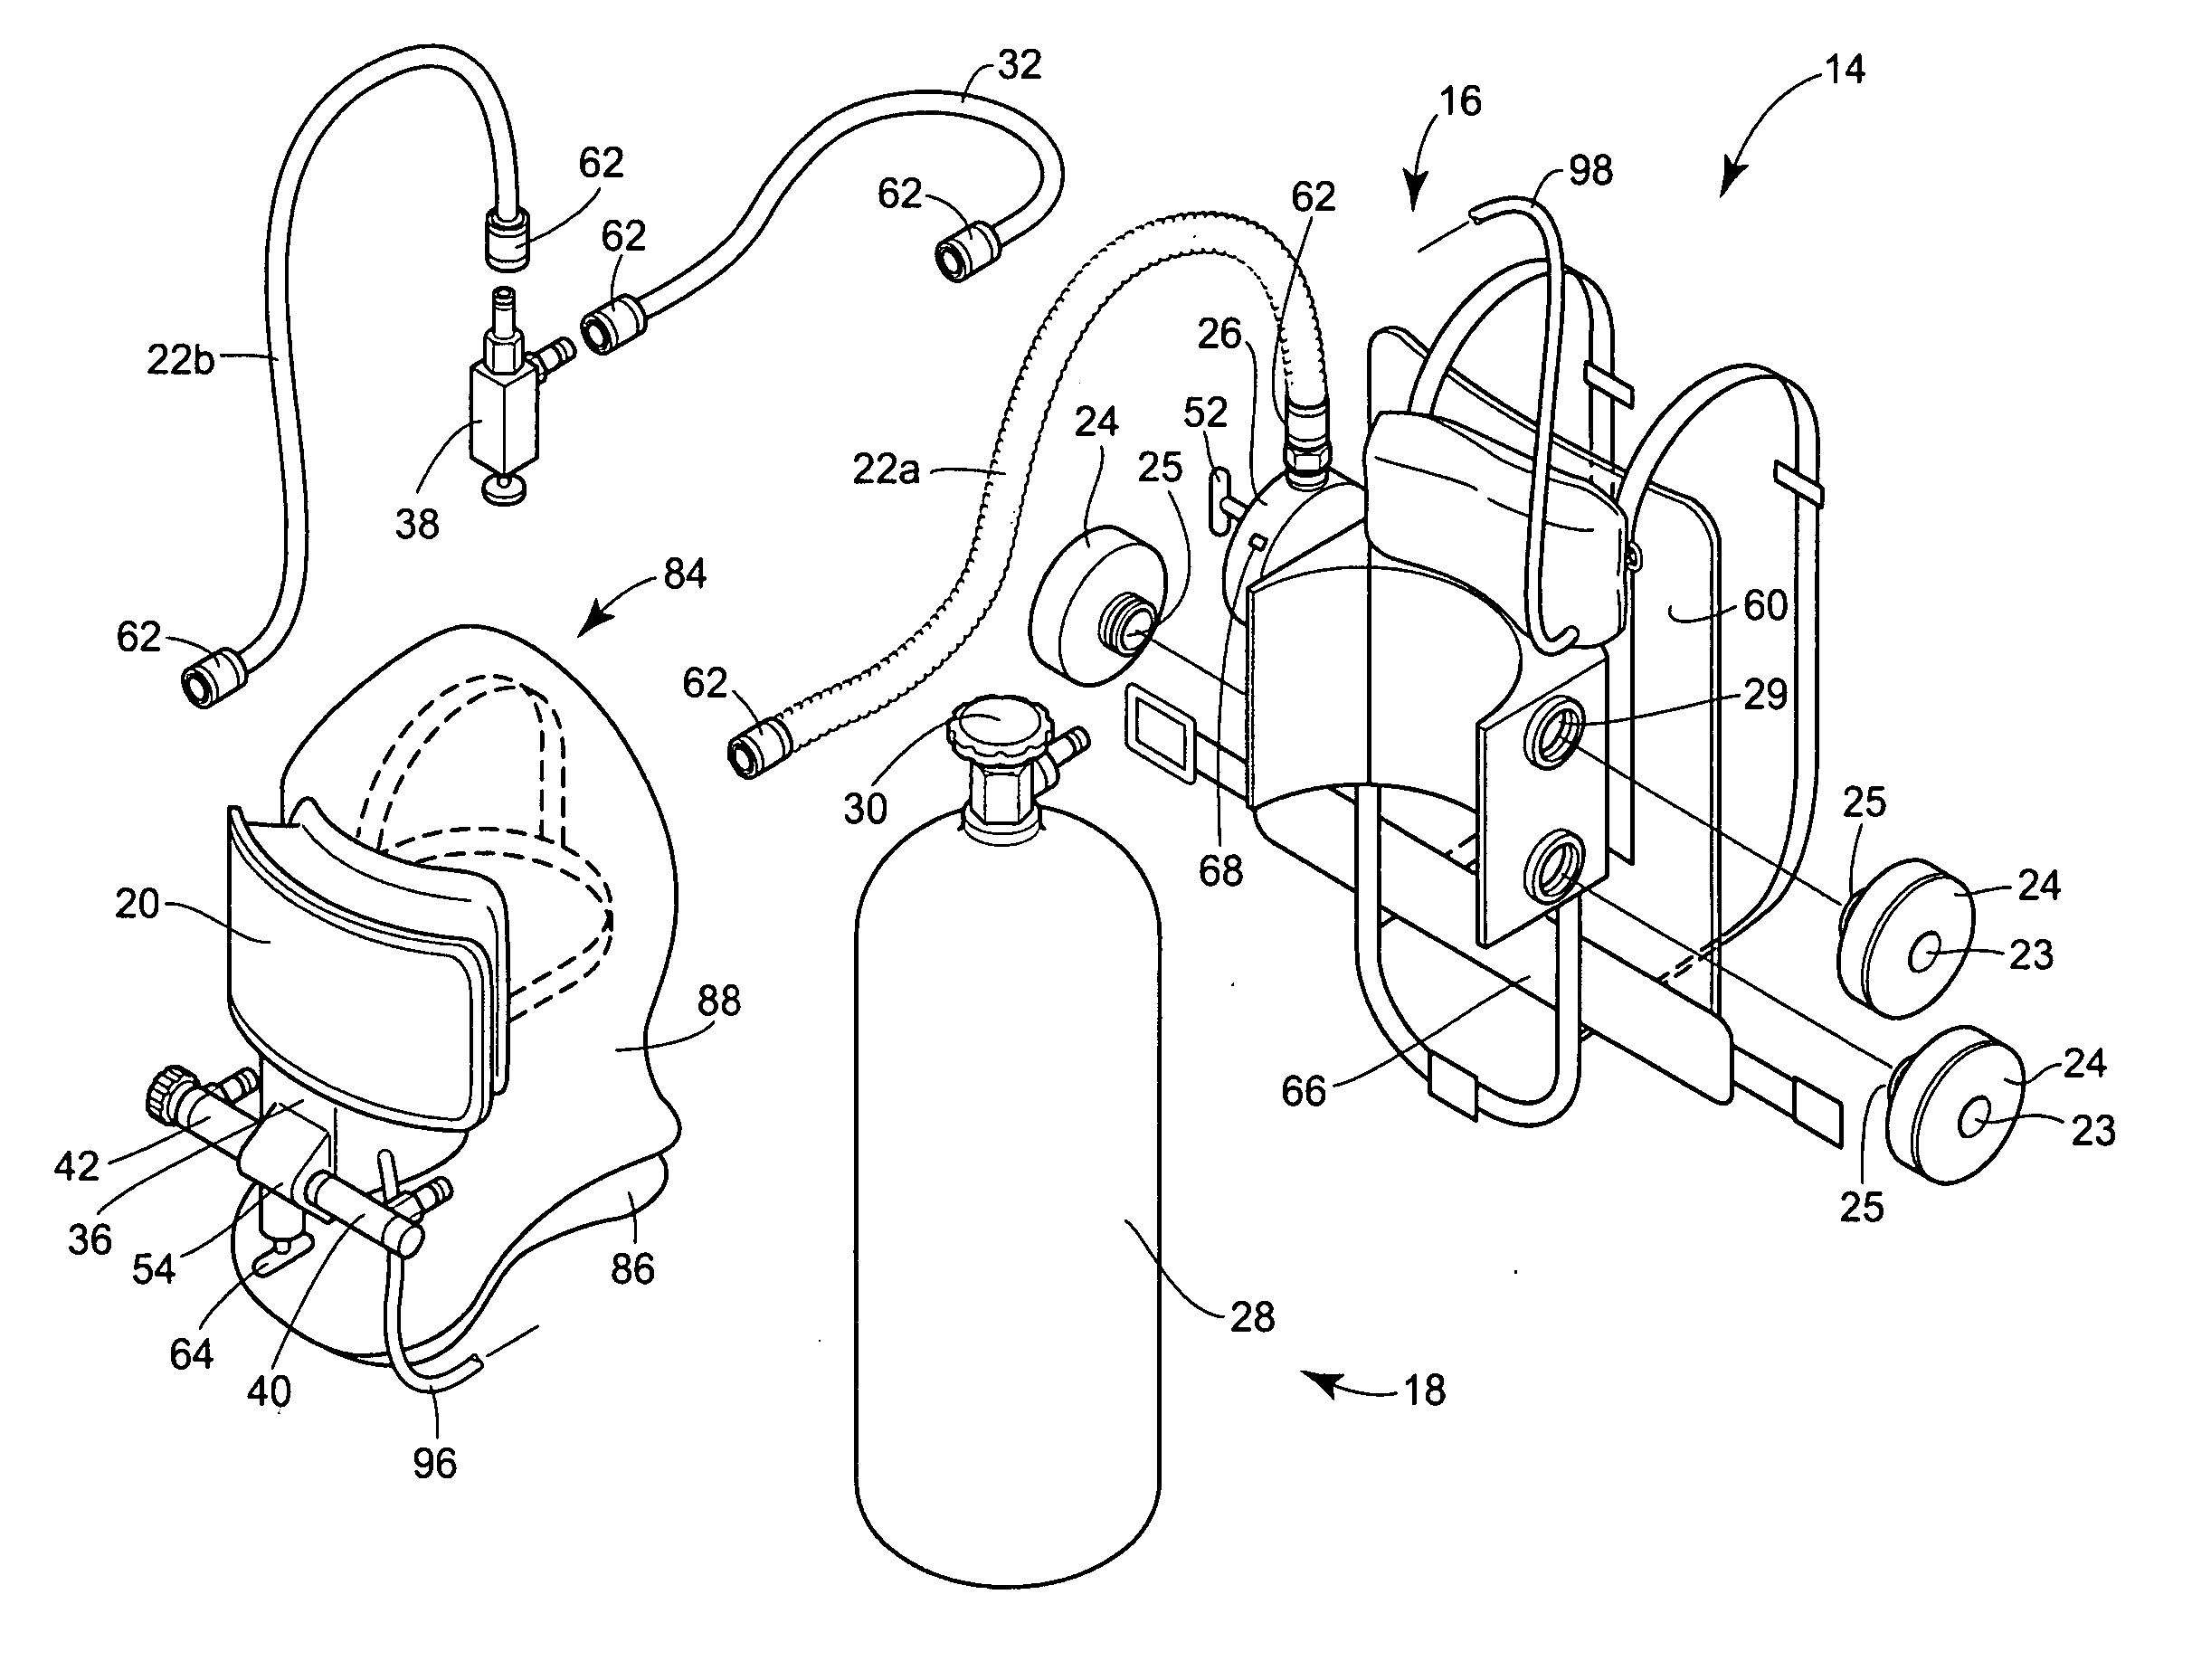 Apparatus and method for providing breathable air and bodily protection in a contaminated environment